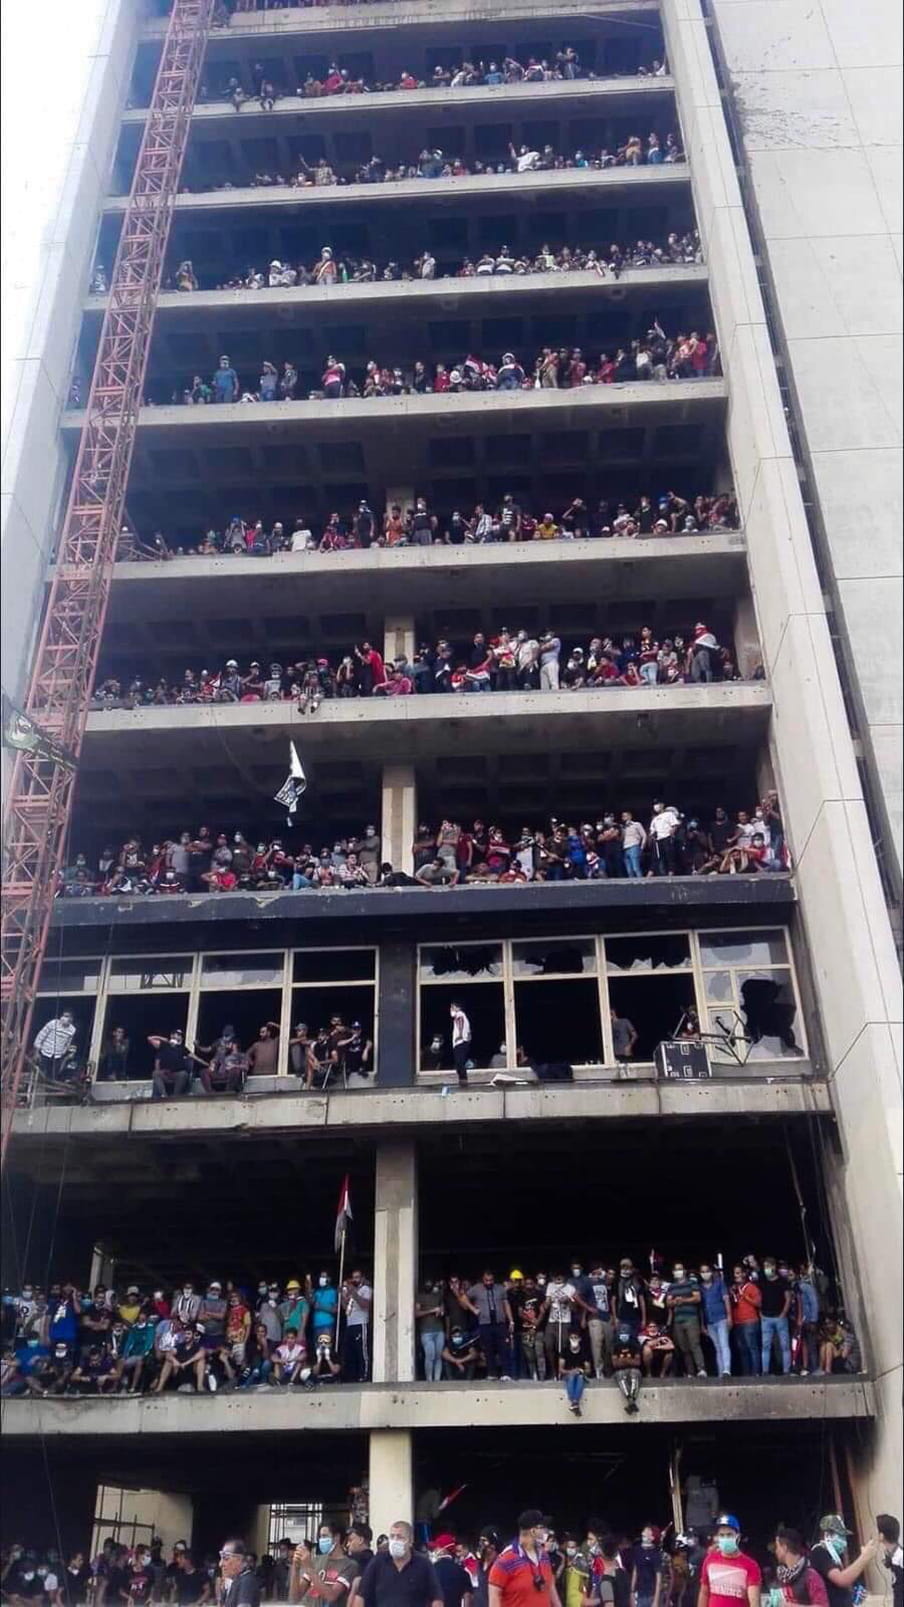 Protestors in Iraq objecting to deteriorating living conditions and corruption. A nine story building filled with people protesting.